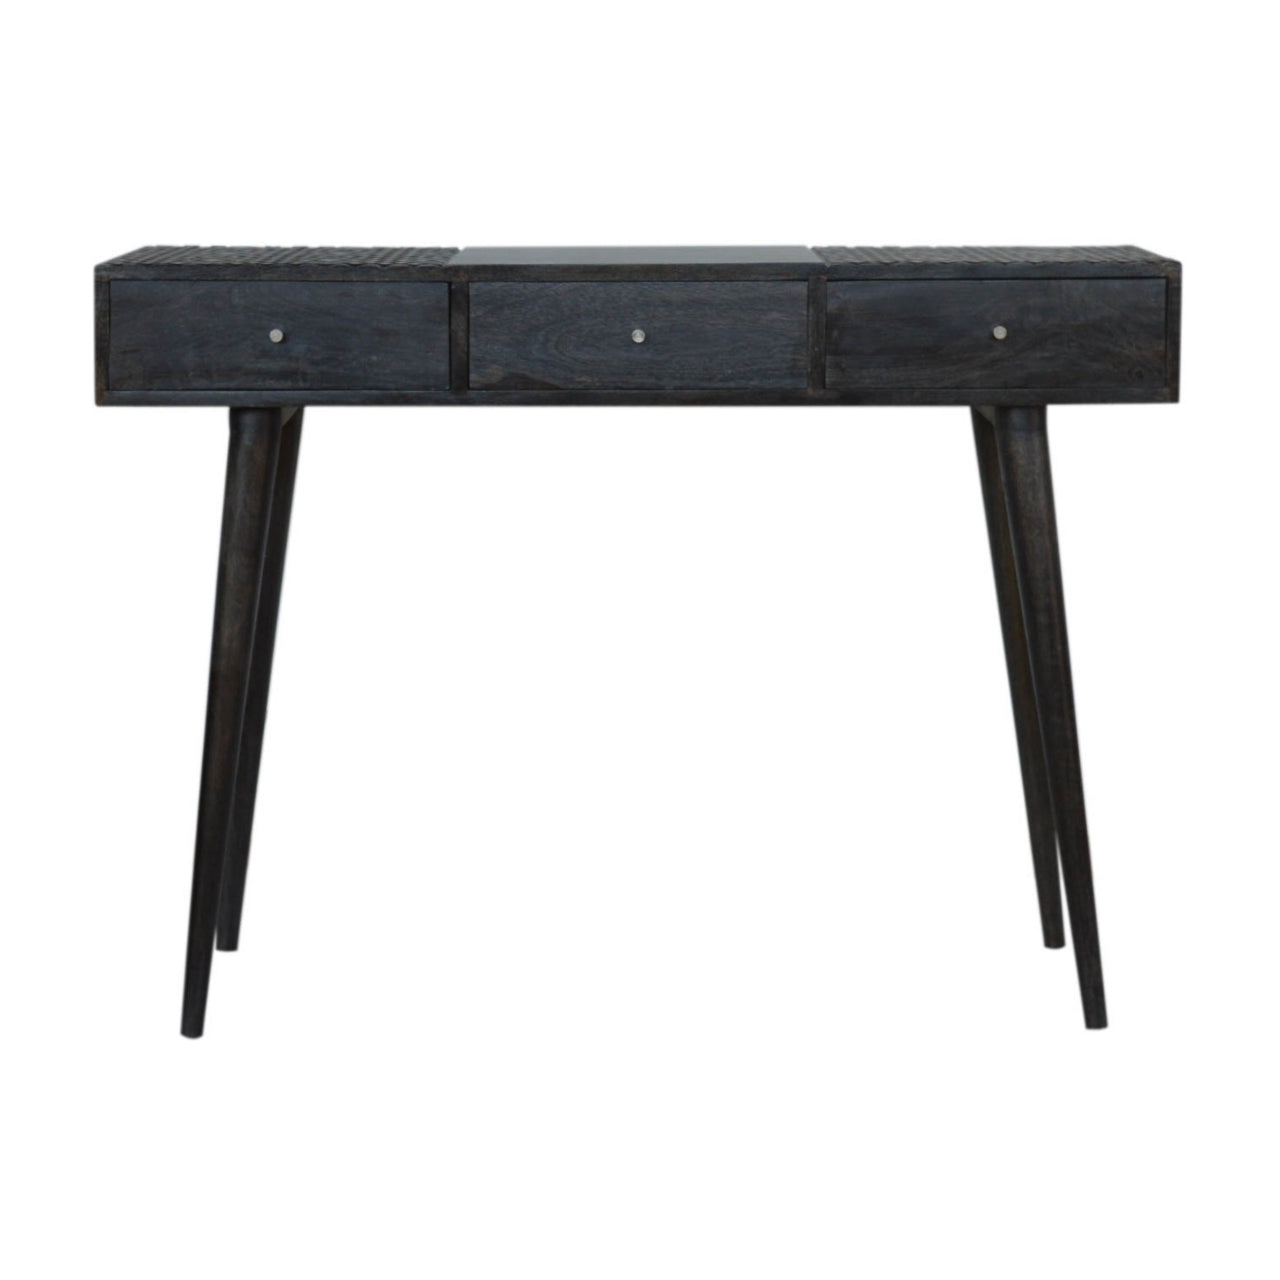 View Ash Black 3 Drawer Console Table information